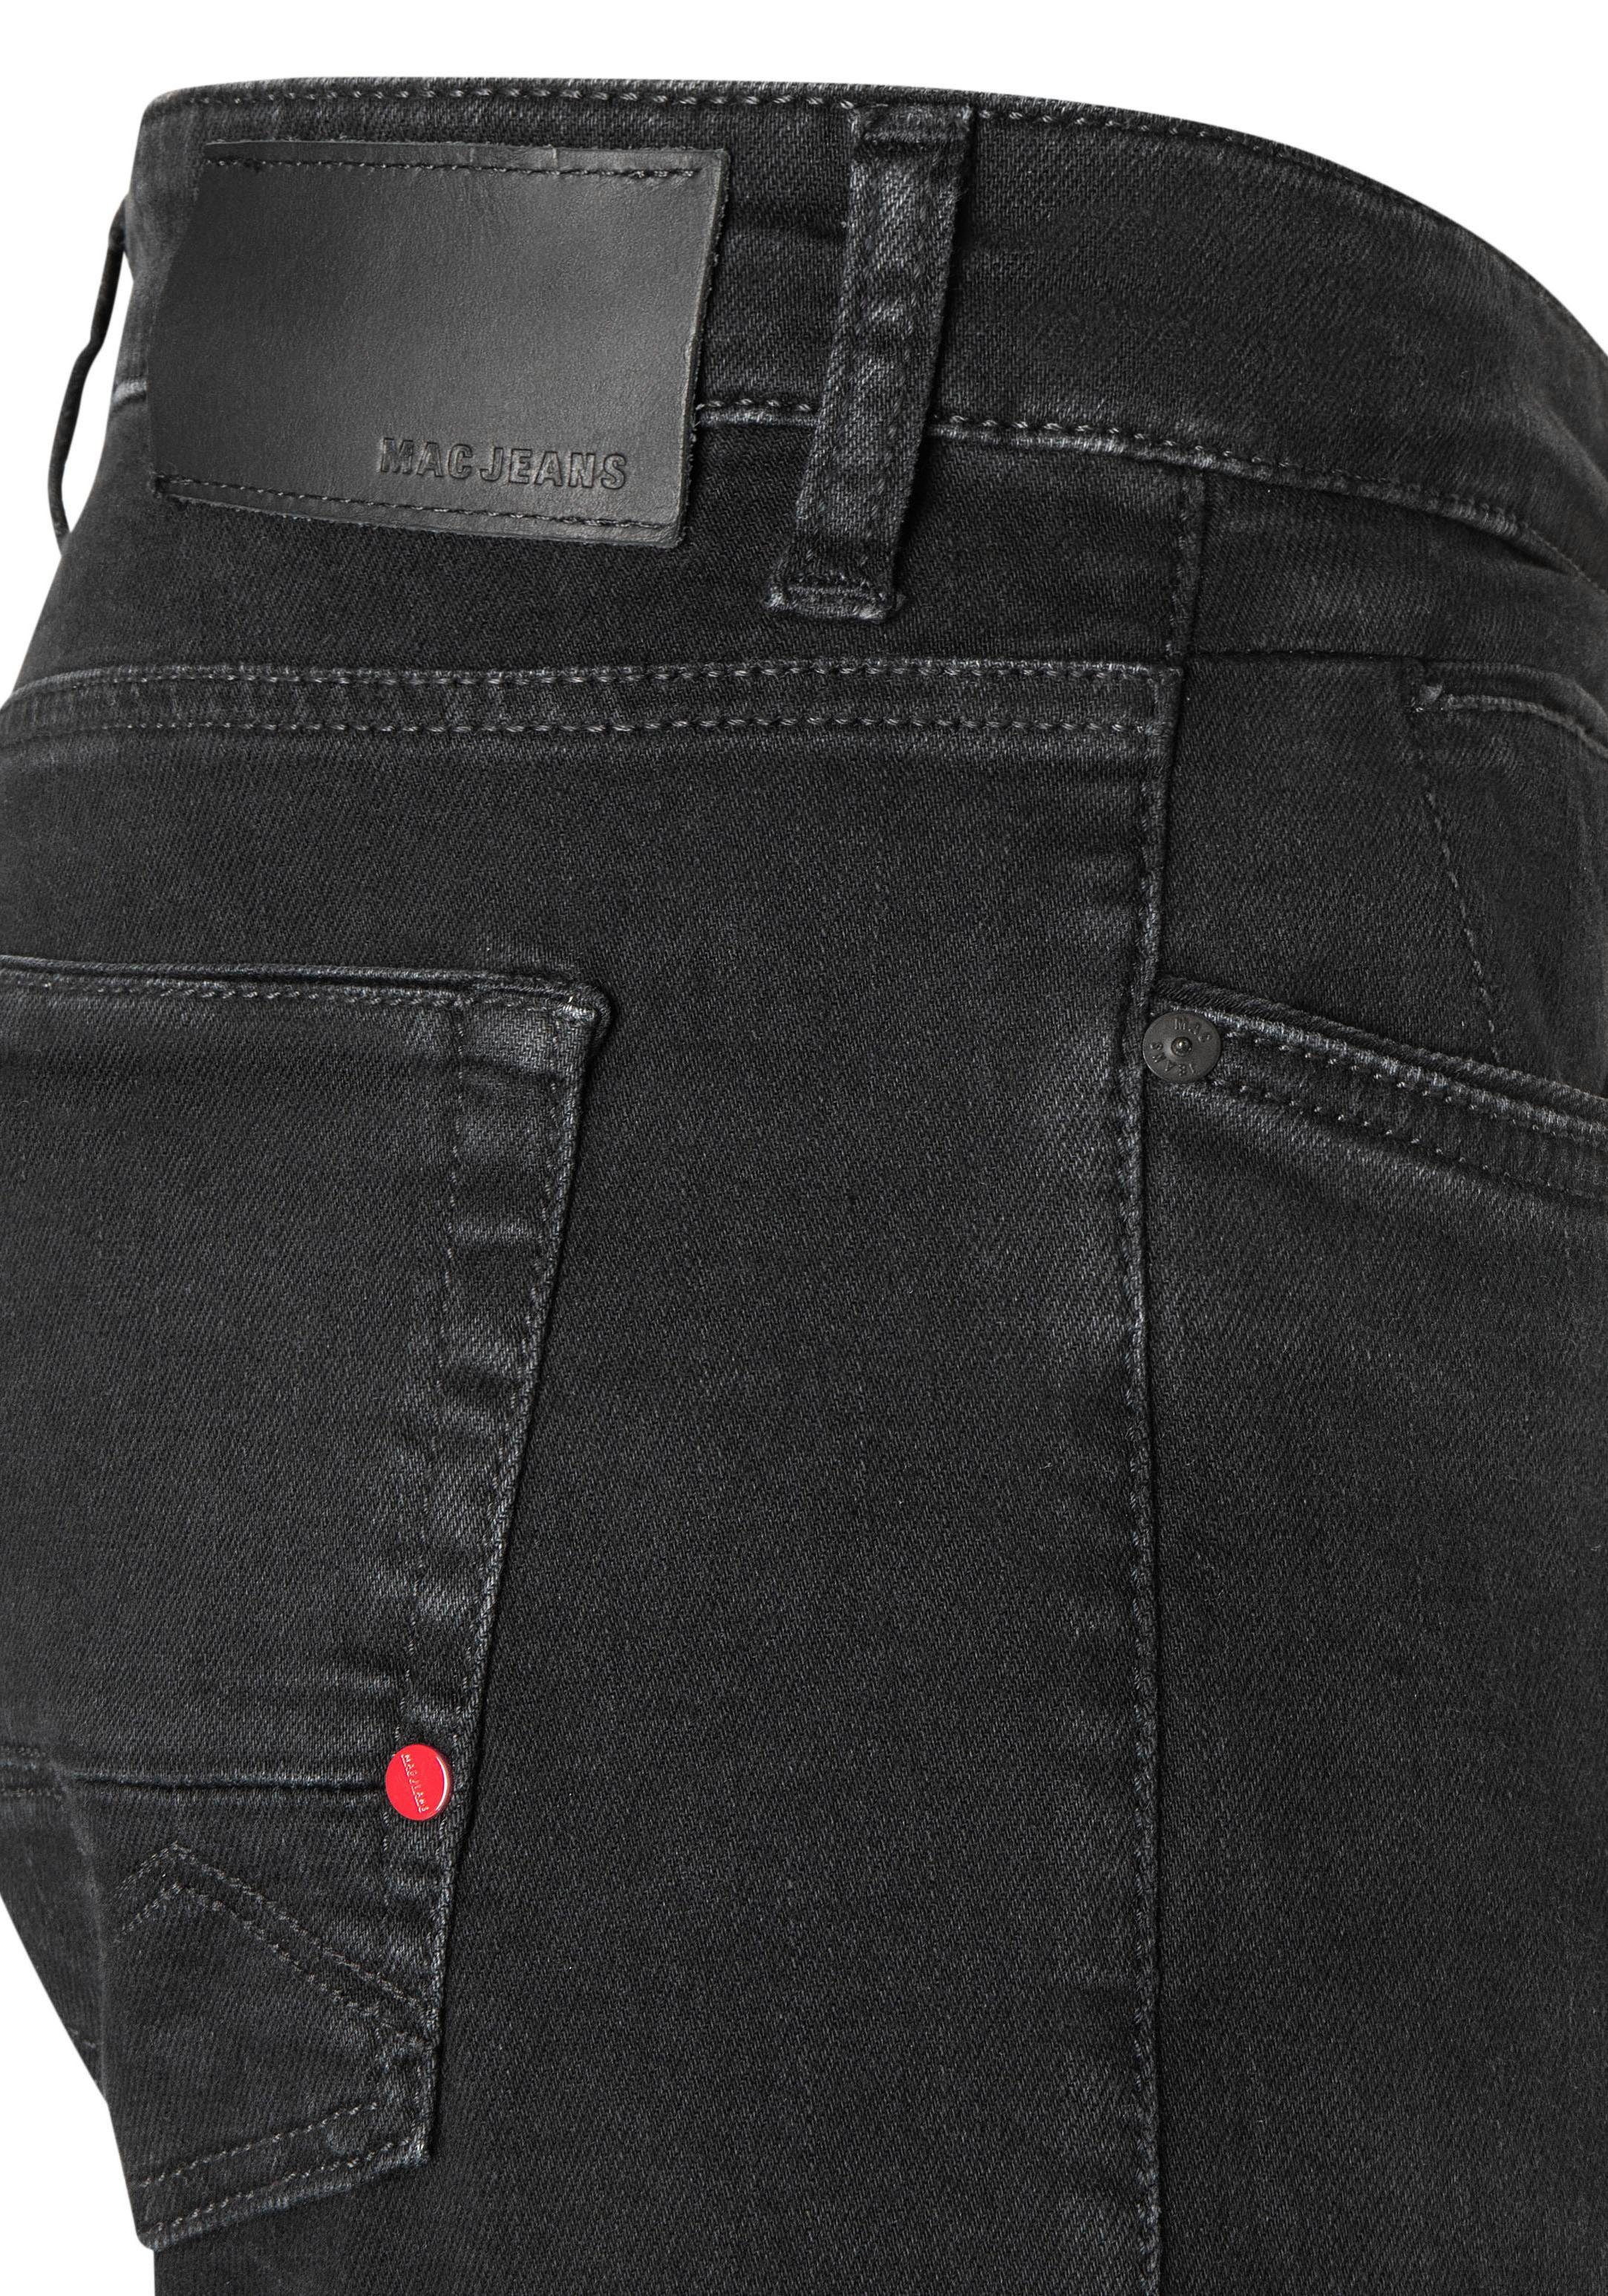 black Arne washed Pipe Straight-Jeans MAC